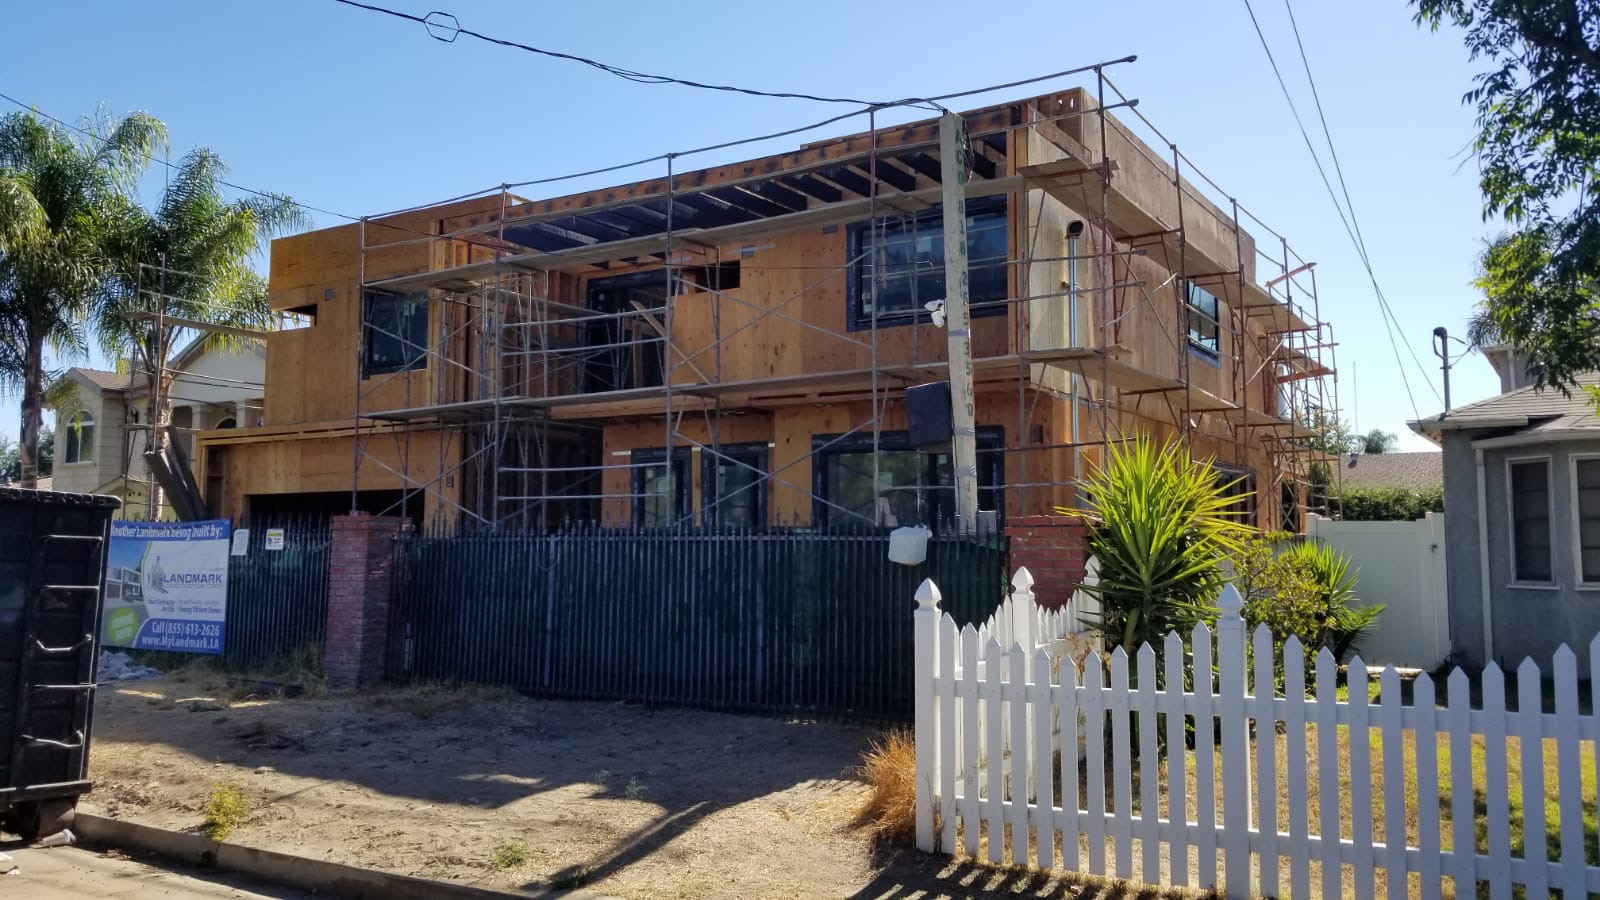 5 STEPS TO BUILDING A HOUSE IN LOS ANGELES